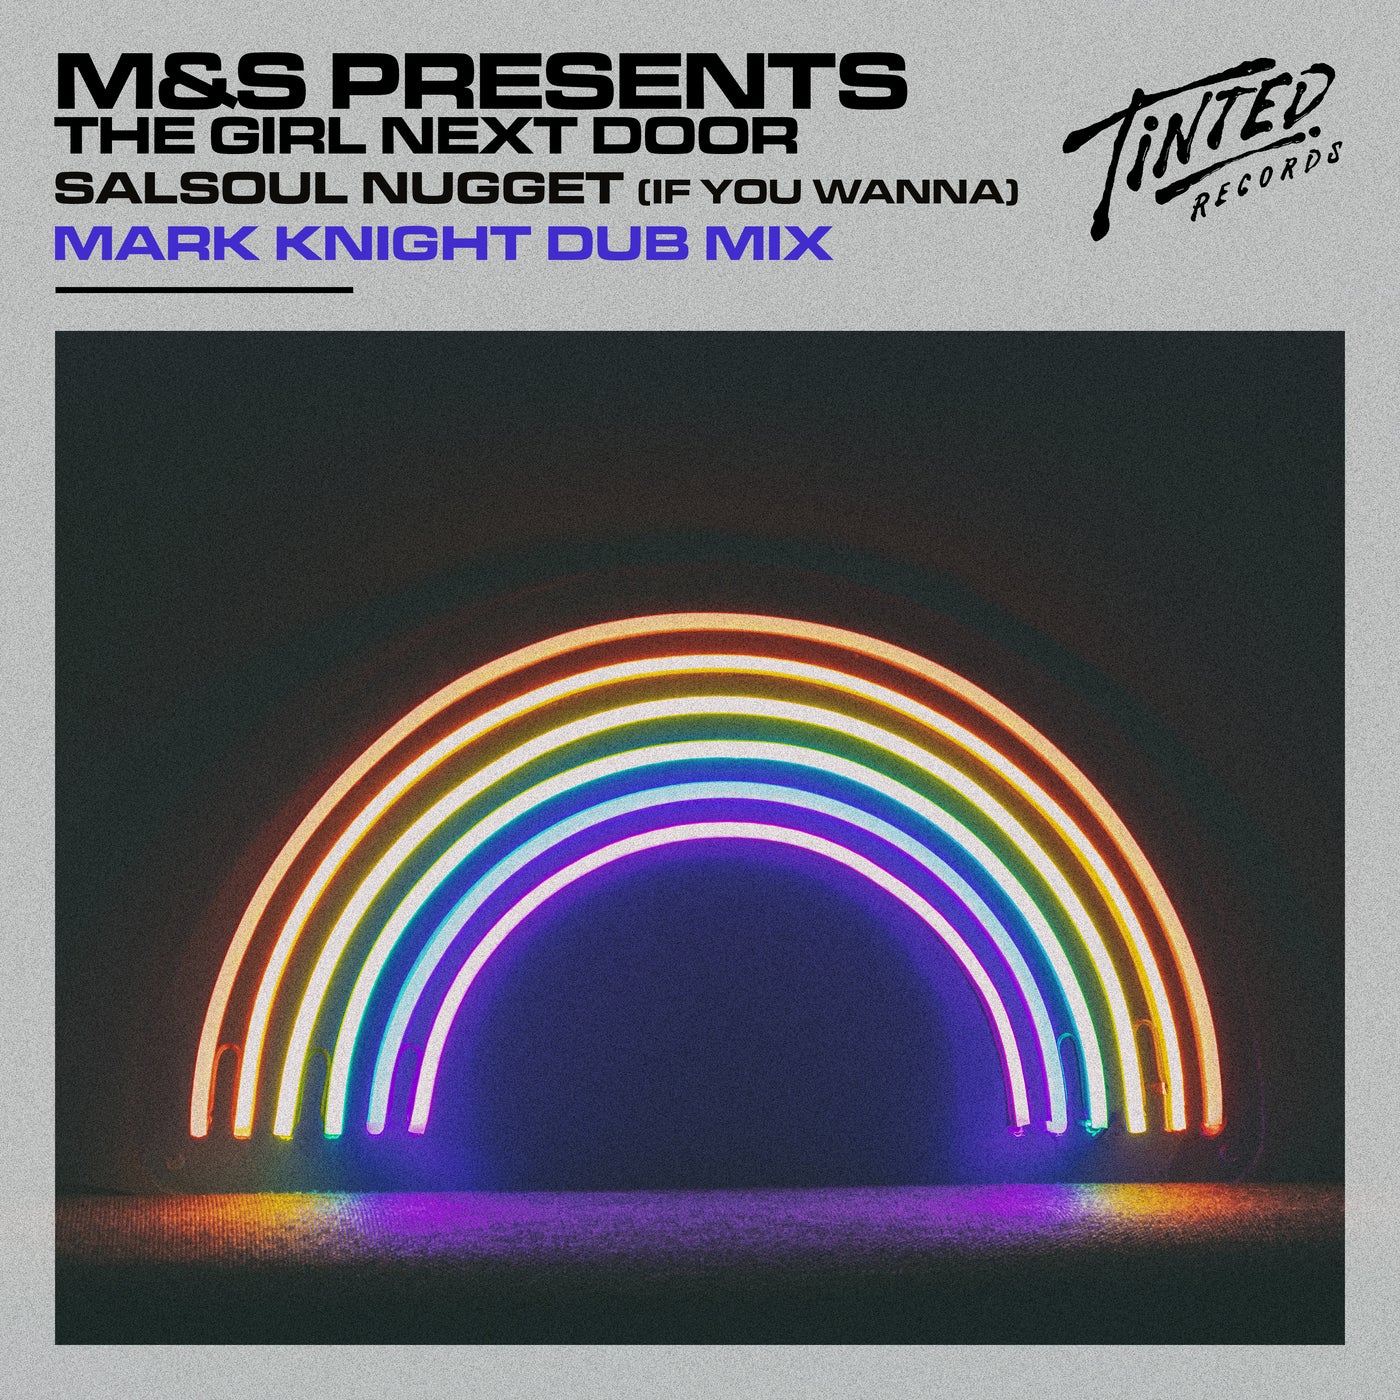 Salsoul Nugget (If You Wanna) [Mark Knight Extended Dub Mix]